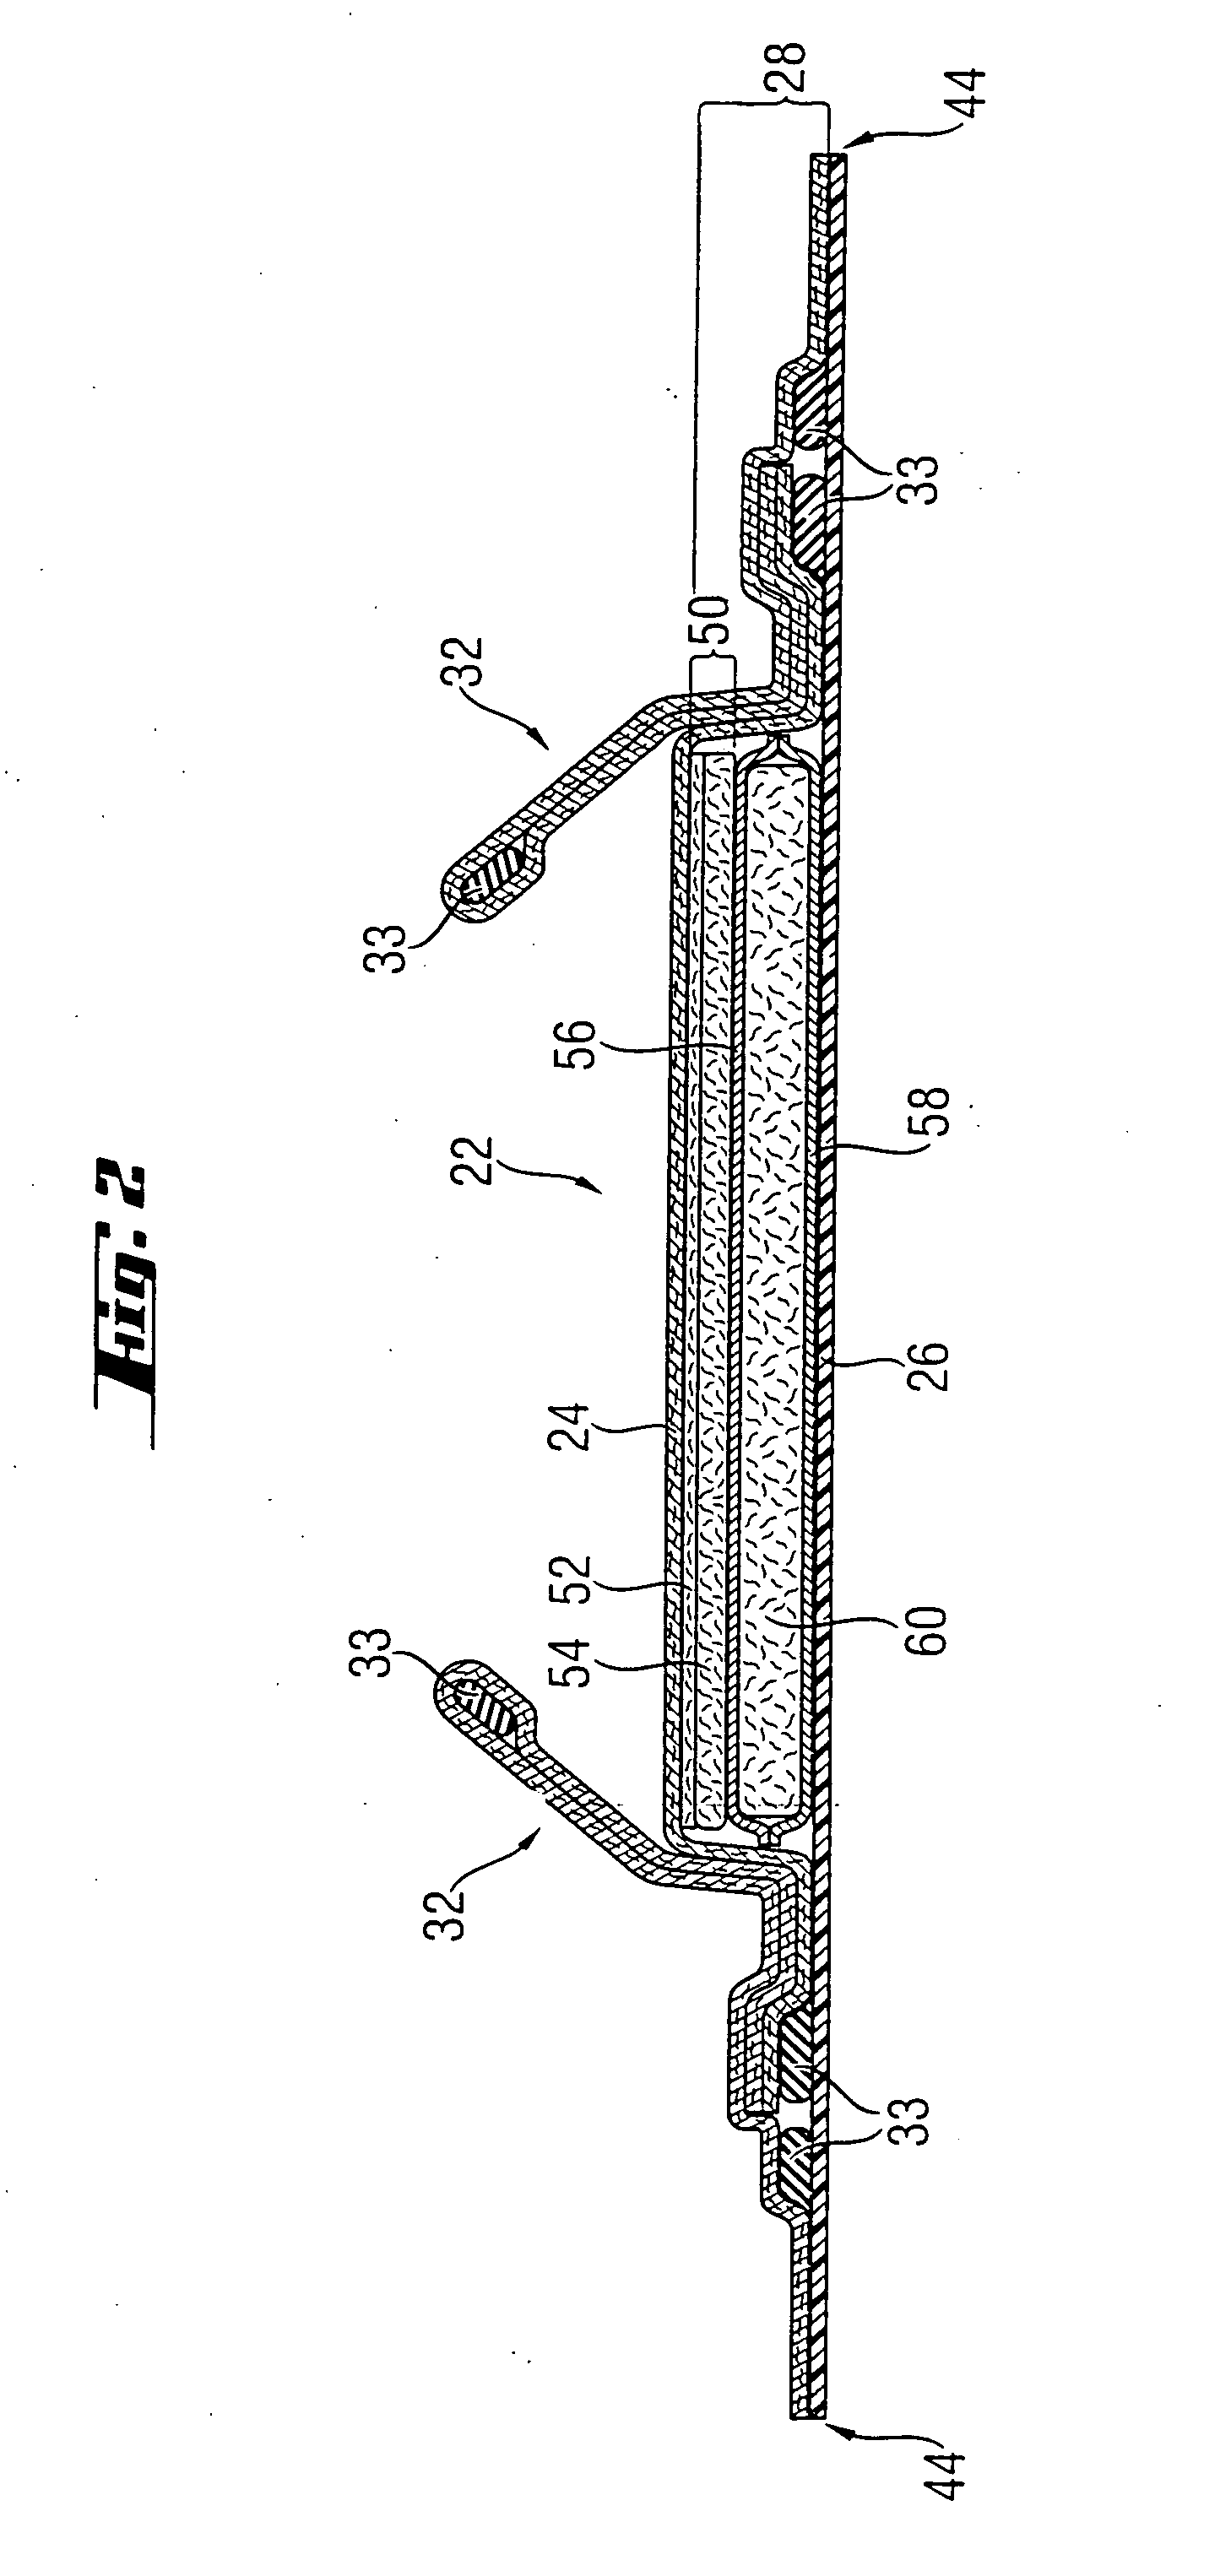 Absorbent articles comprising super absorbent polymer having a substantially non-convalently bonded surface coating